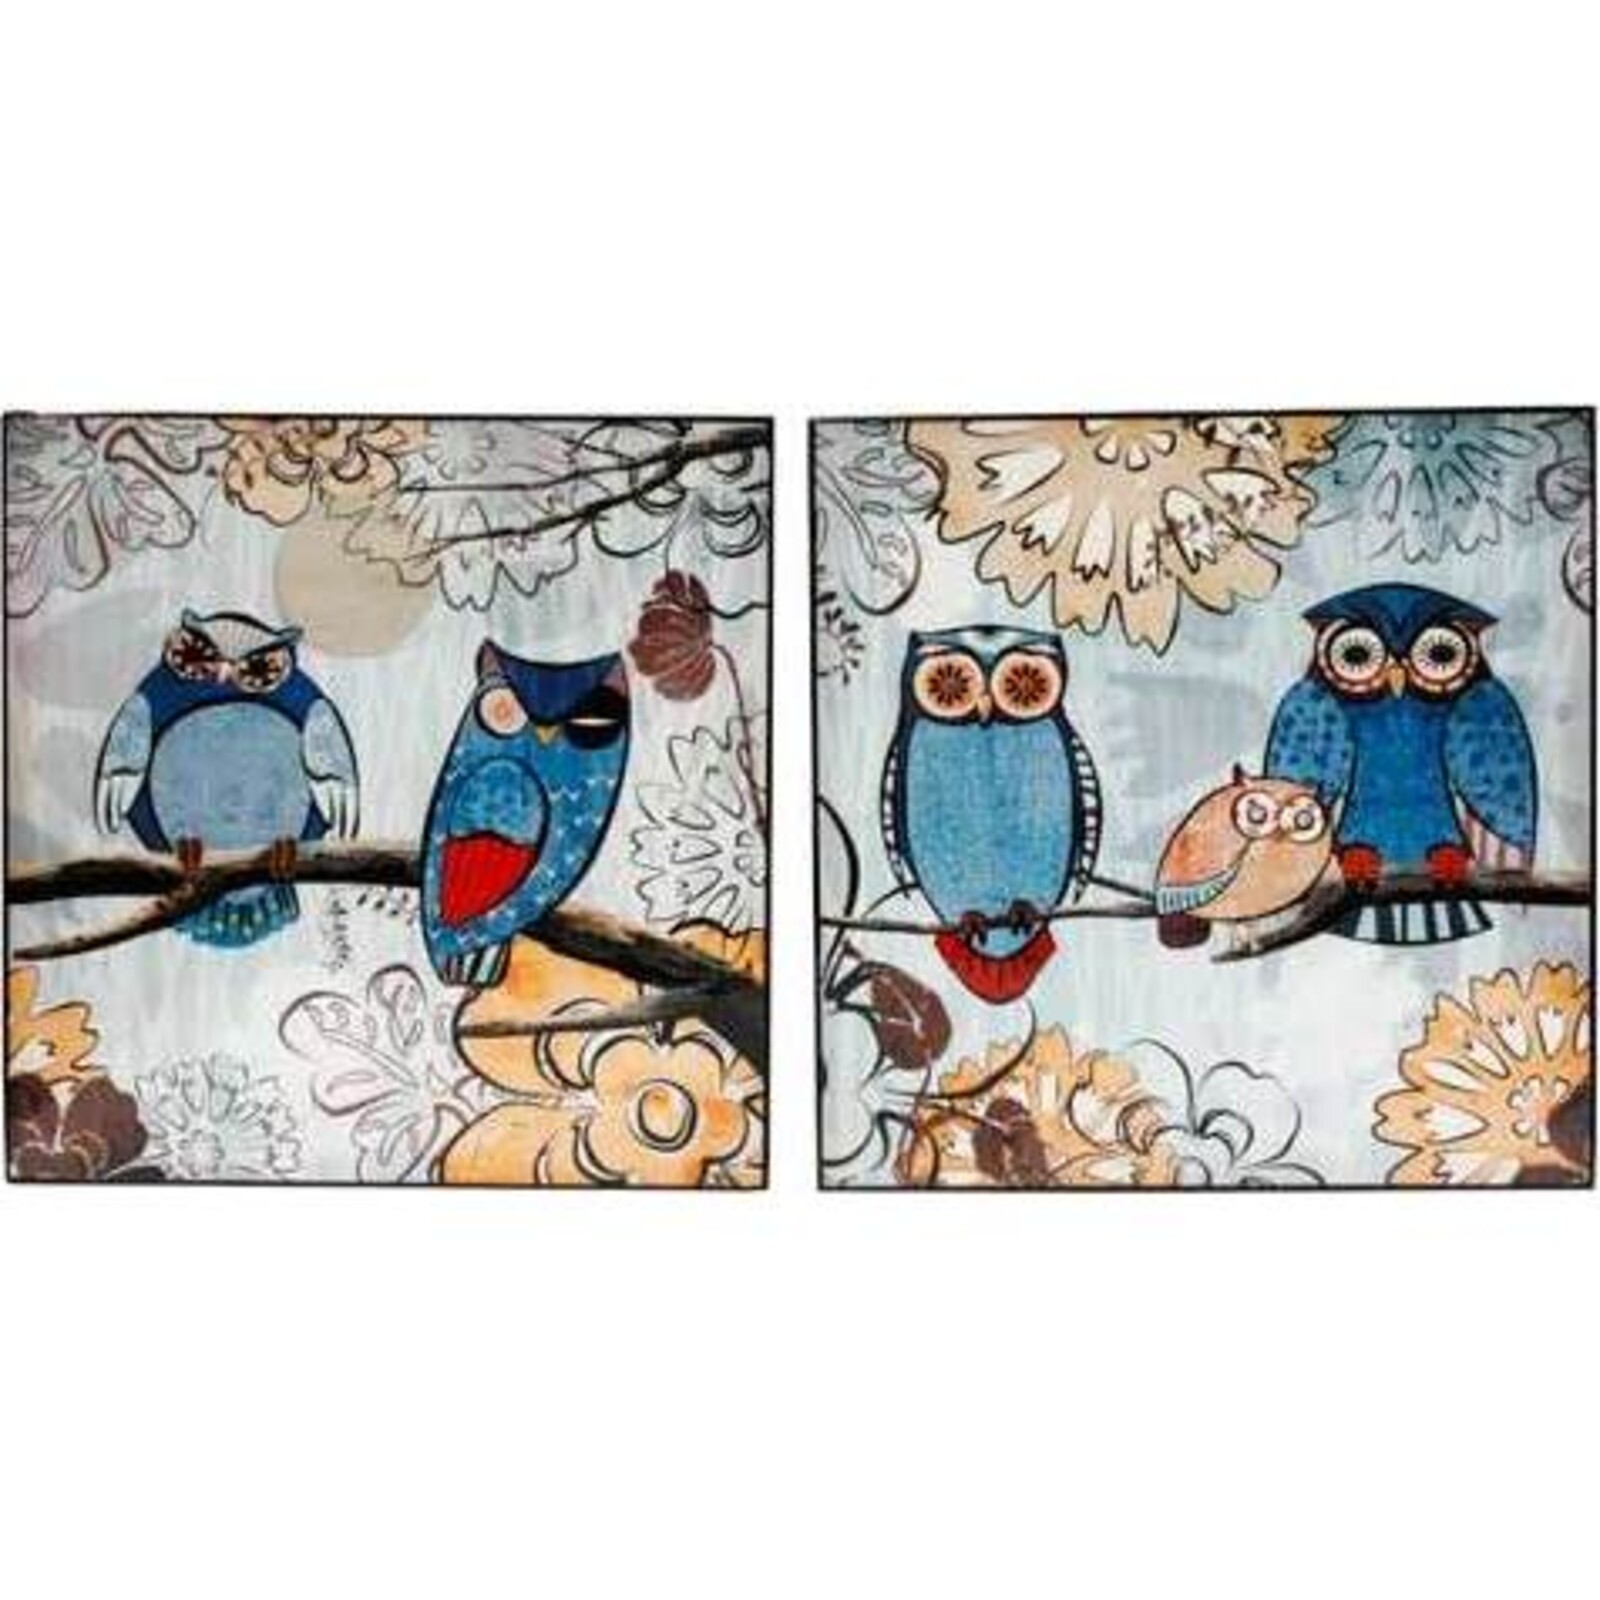 Lacquer-Pair of Owls